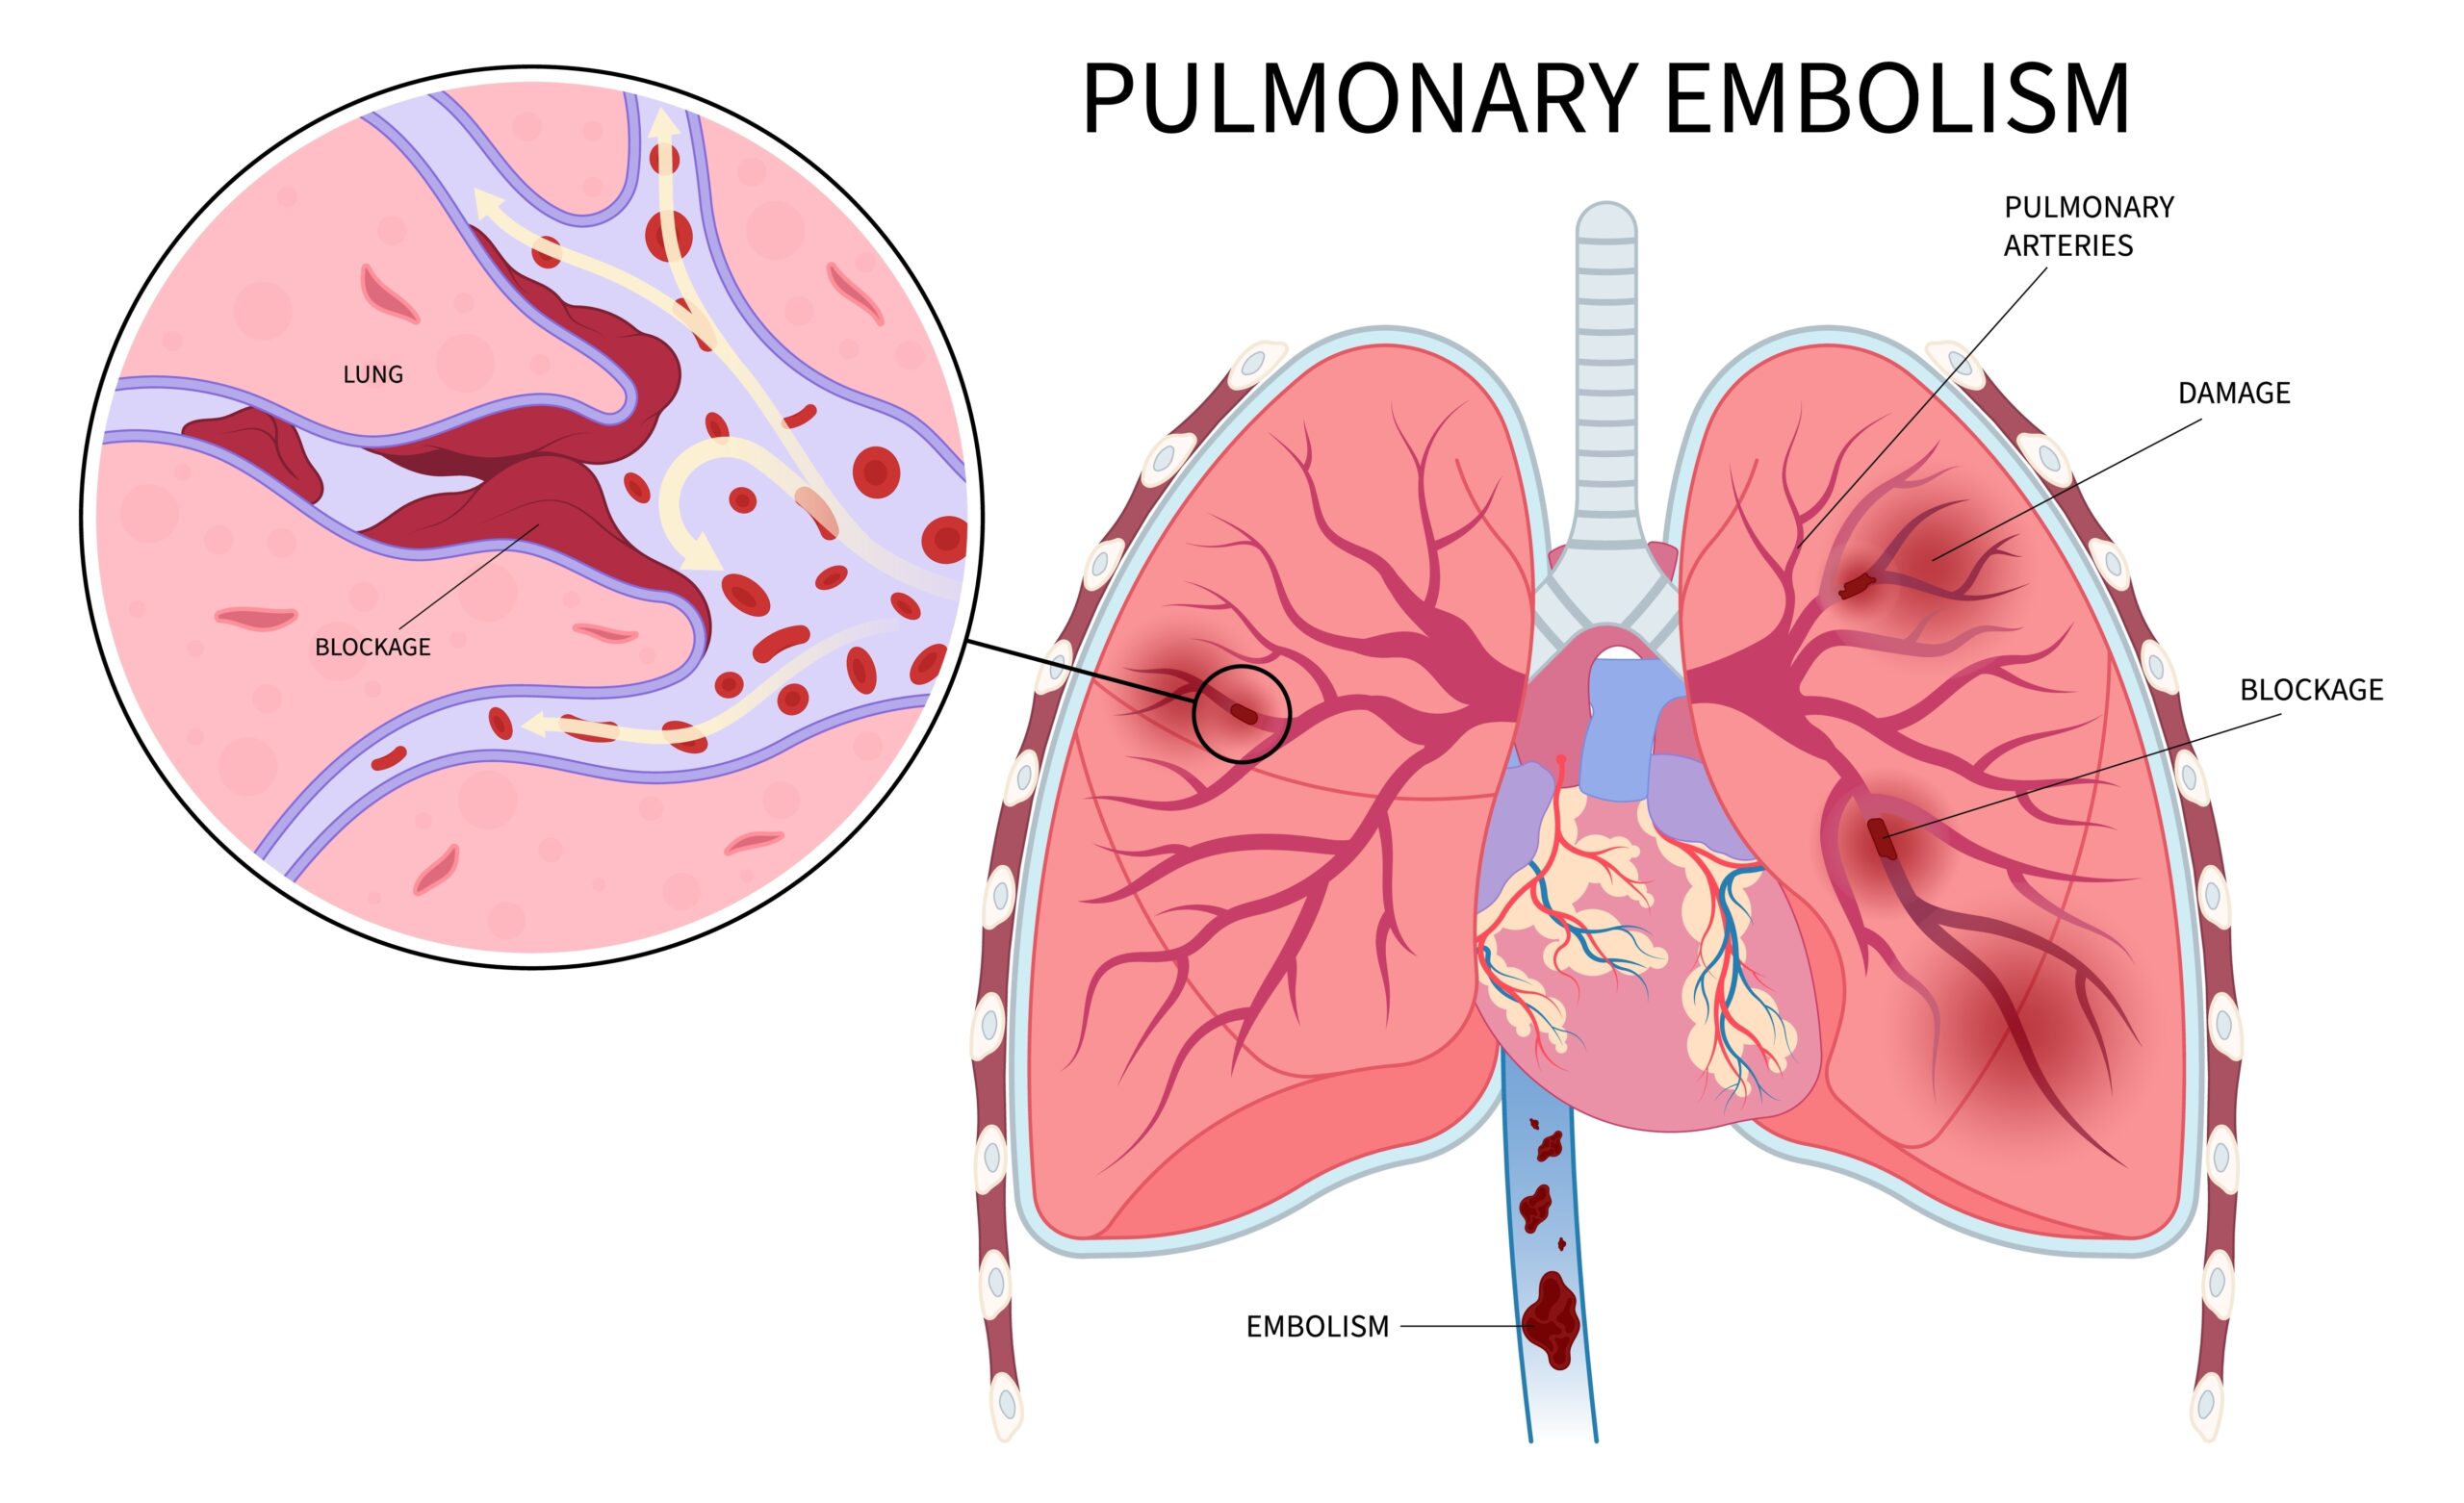 Pulmonary Embolism: What Is, Causes, Symptoms, and Diagnosis